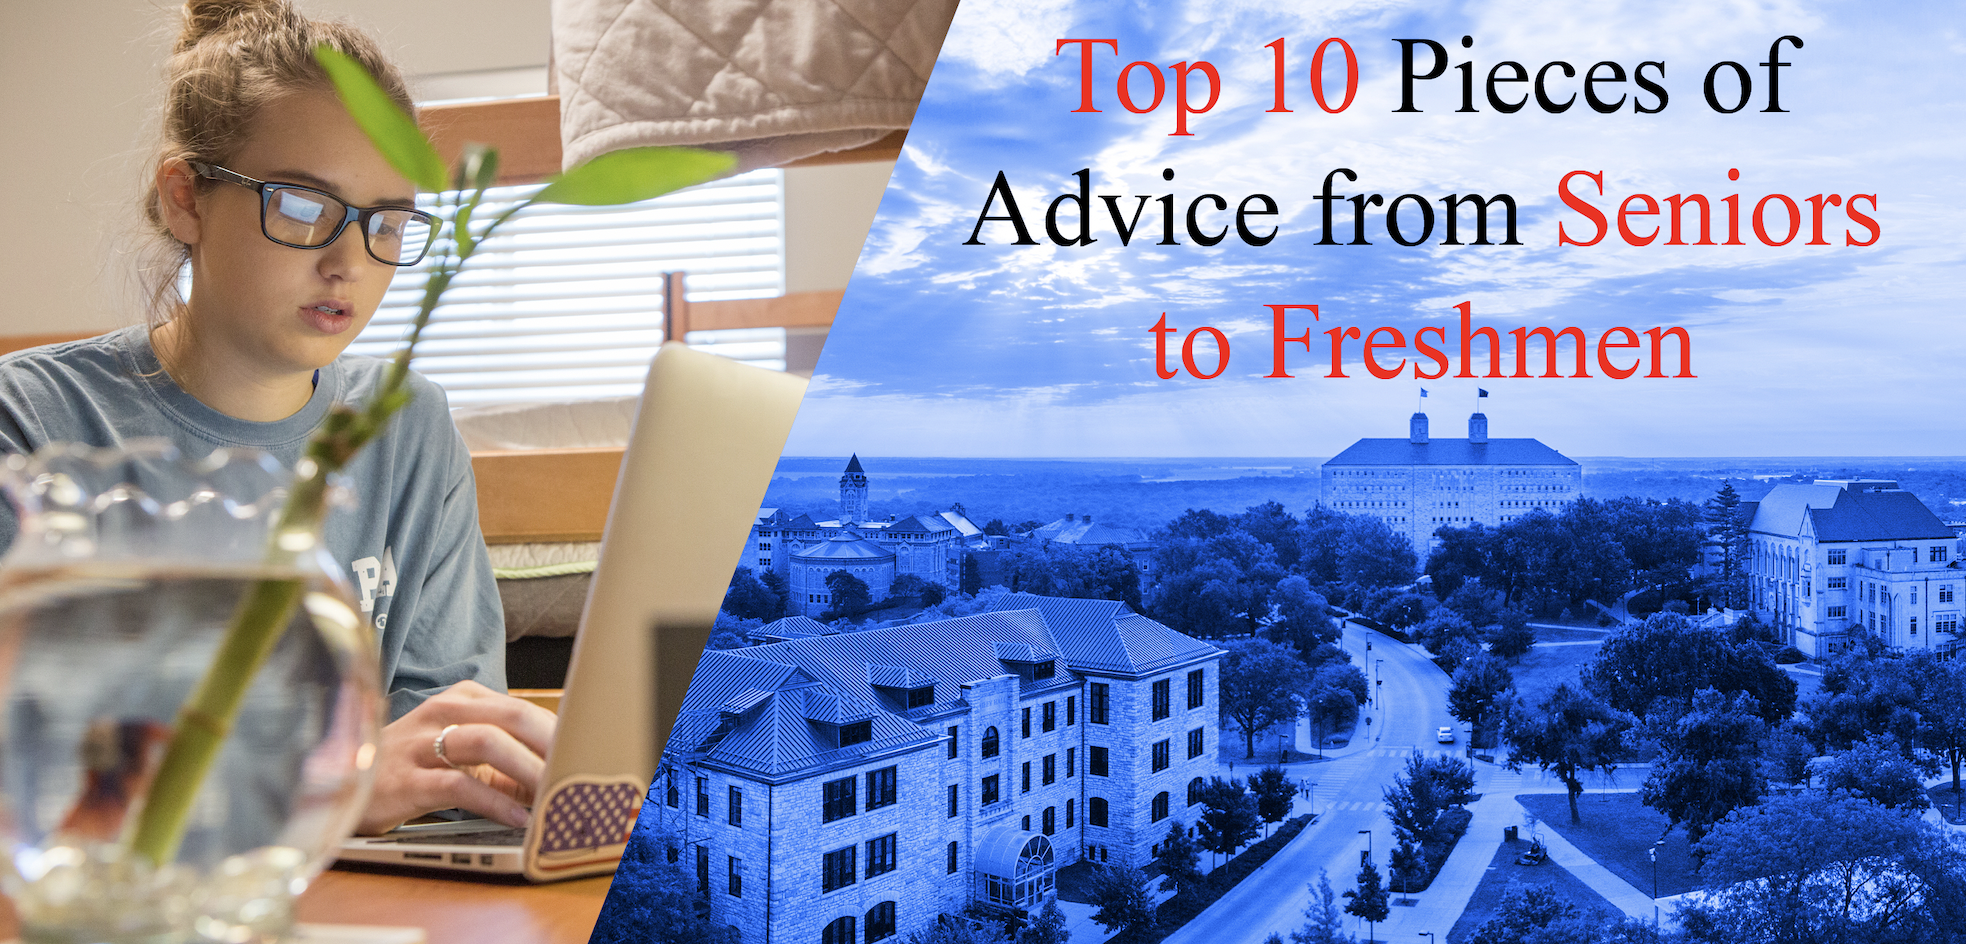 Top 10 Pieces of Advice from Seniors to Freshmen